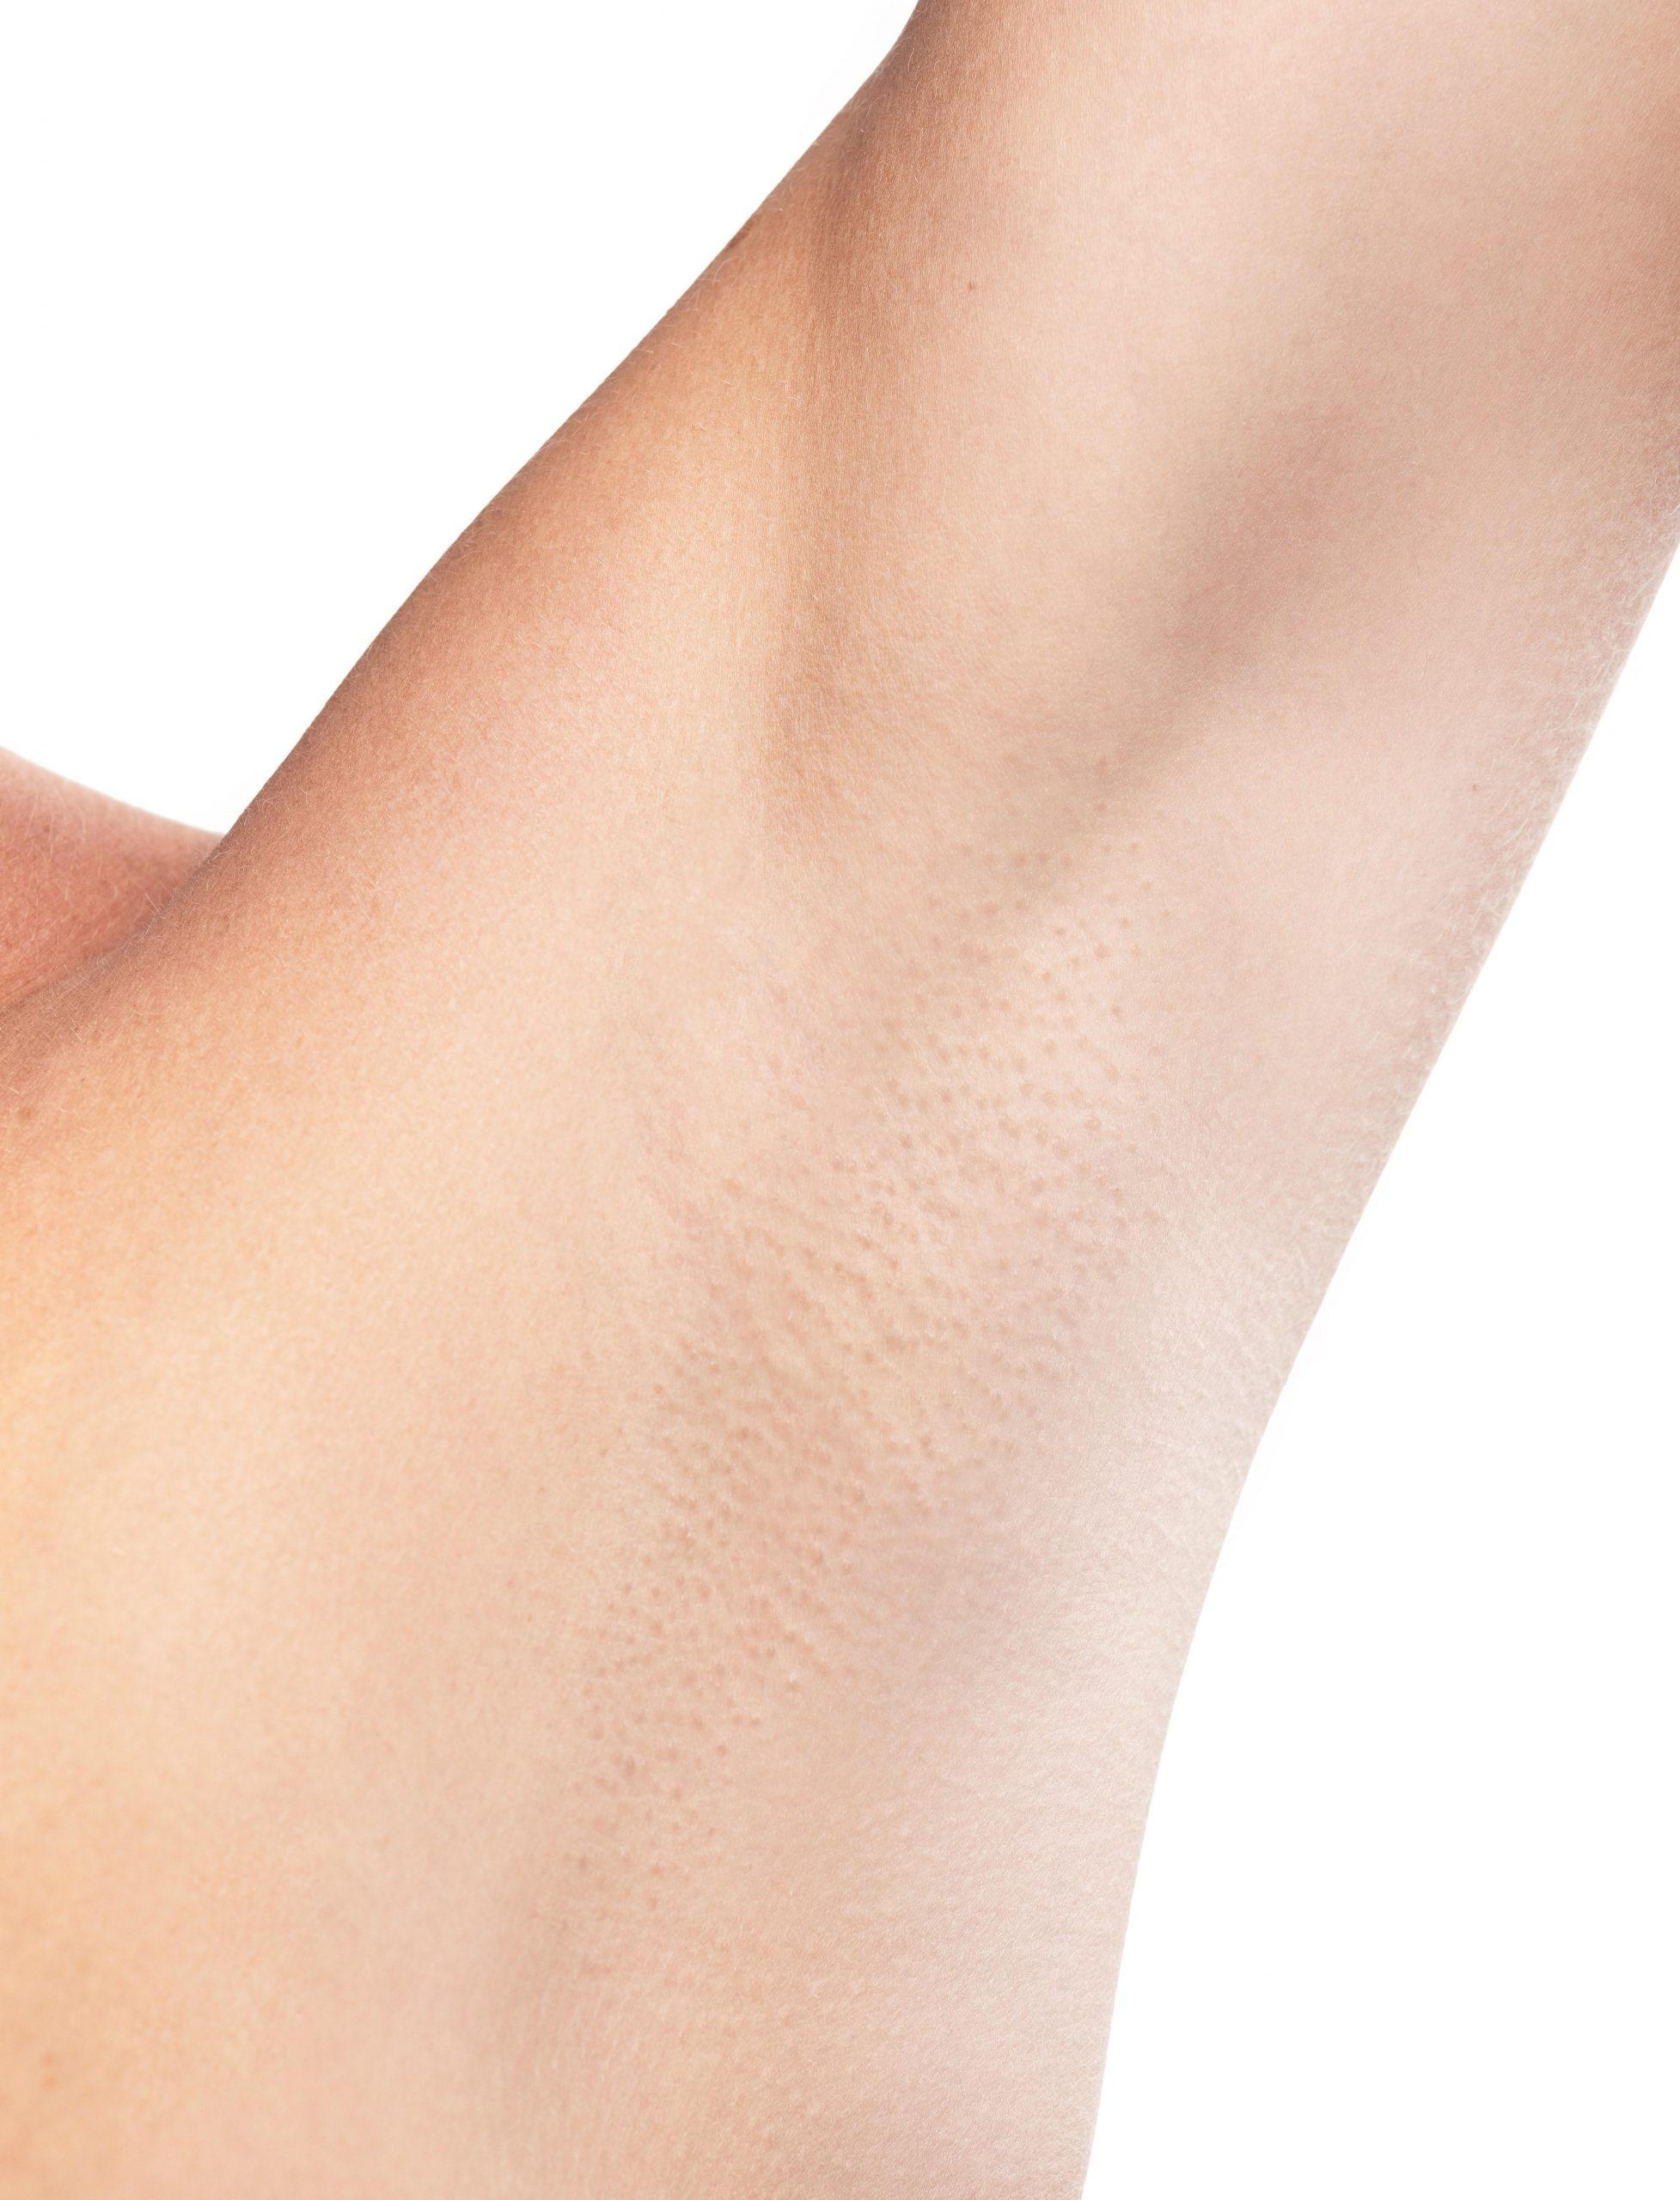 Laser hair removal results on underarm